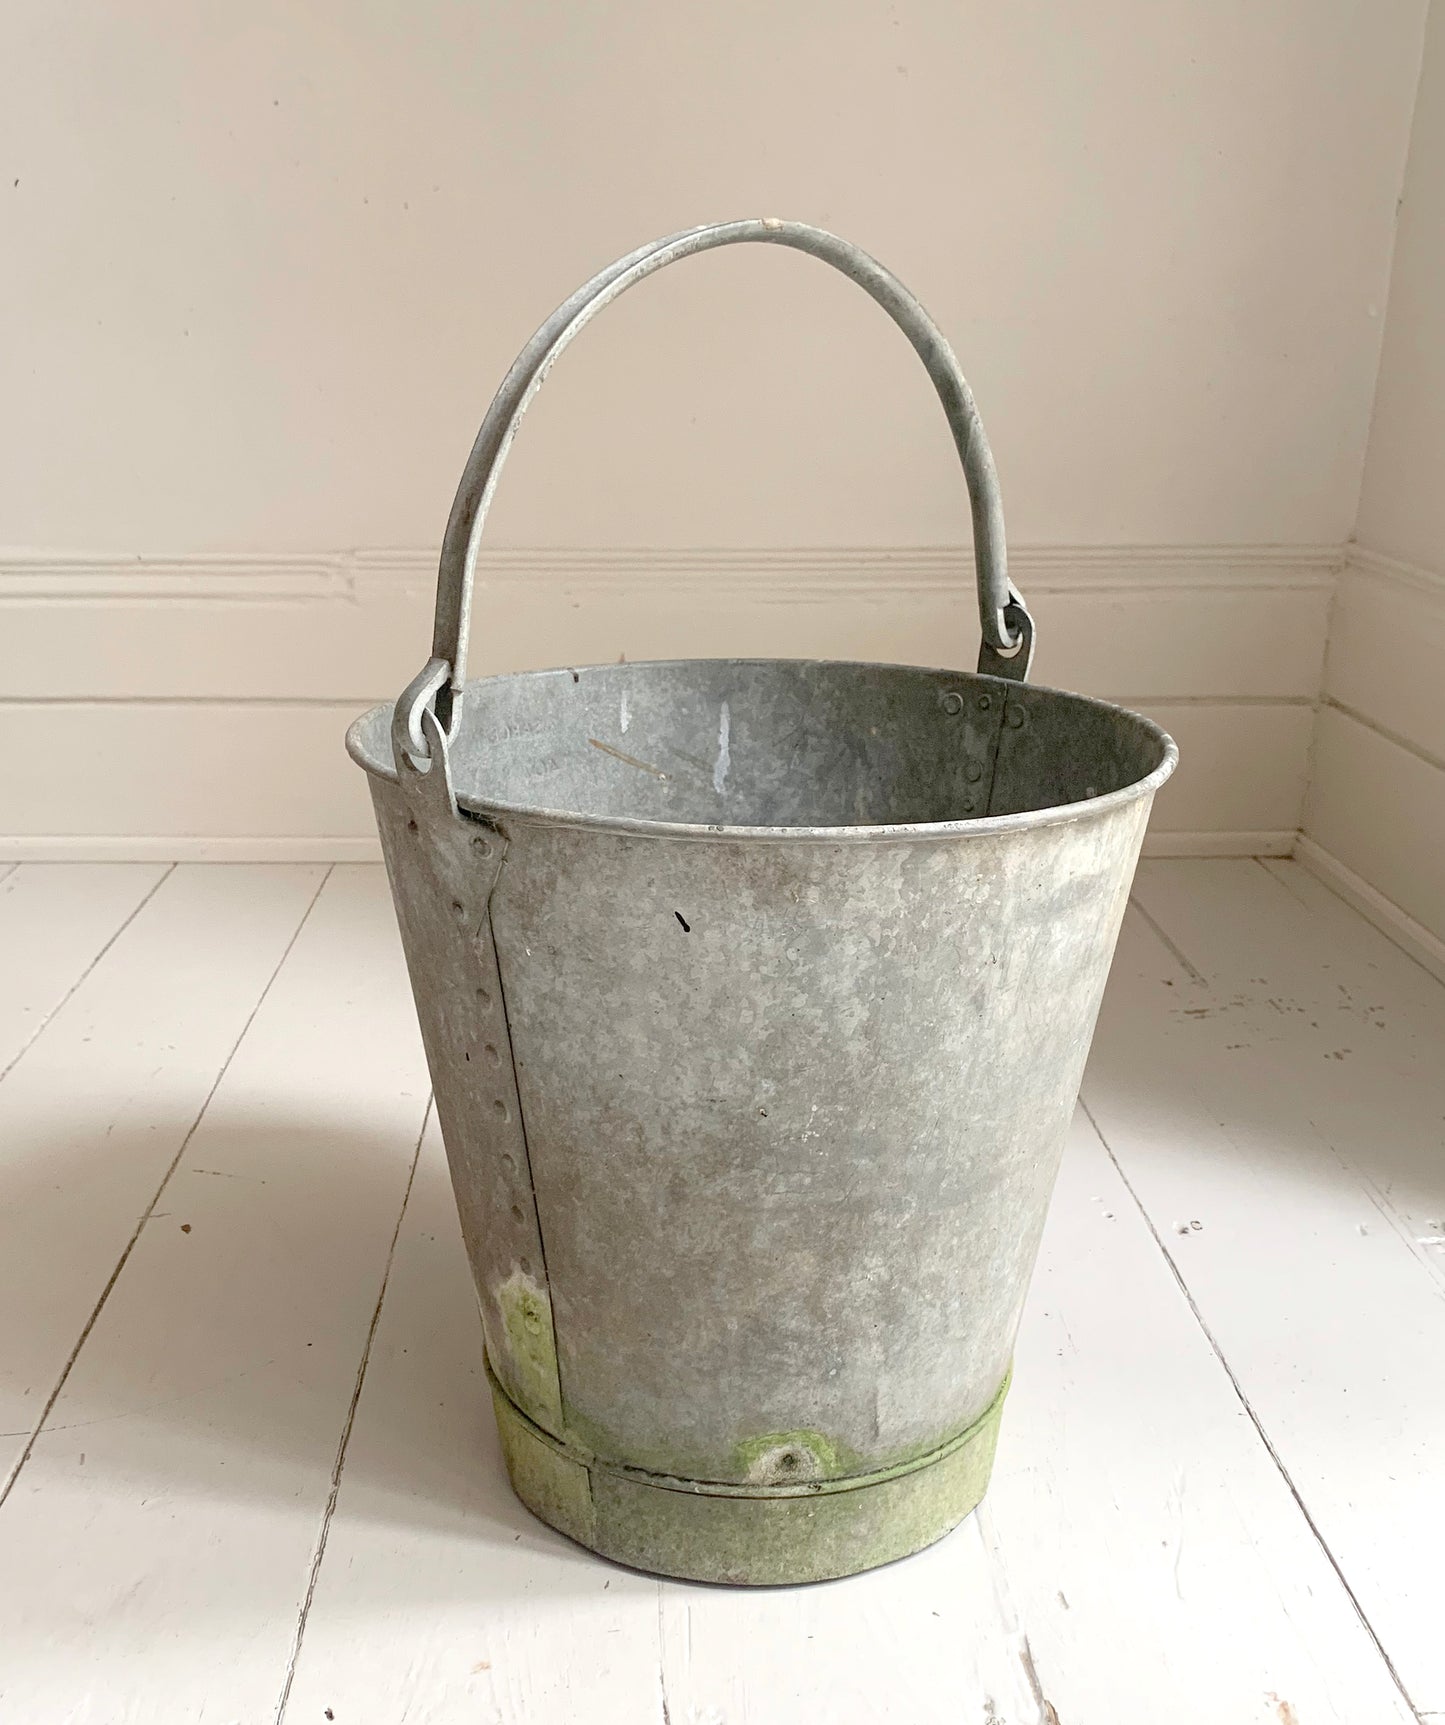 Vintage Galvanised Metal Bucket - Perfect for a Planter